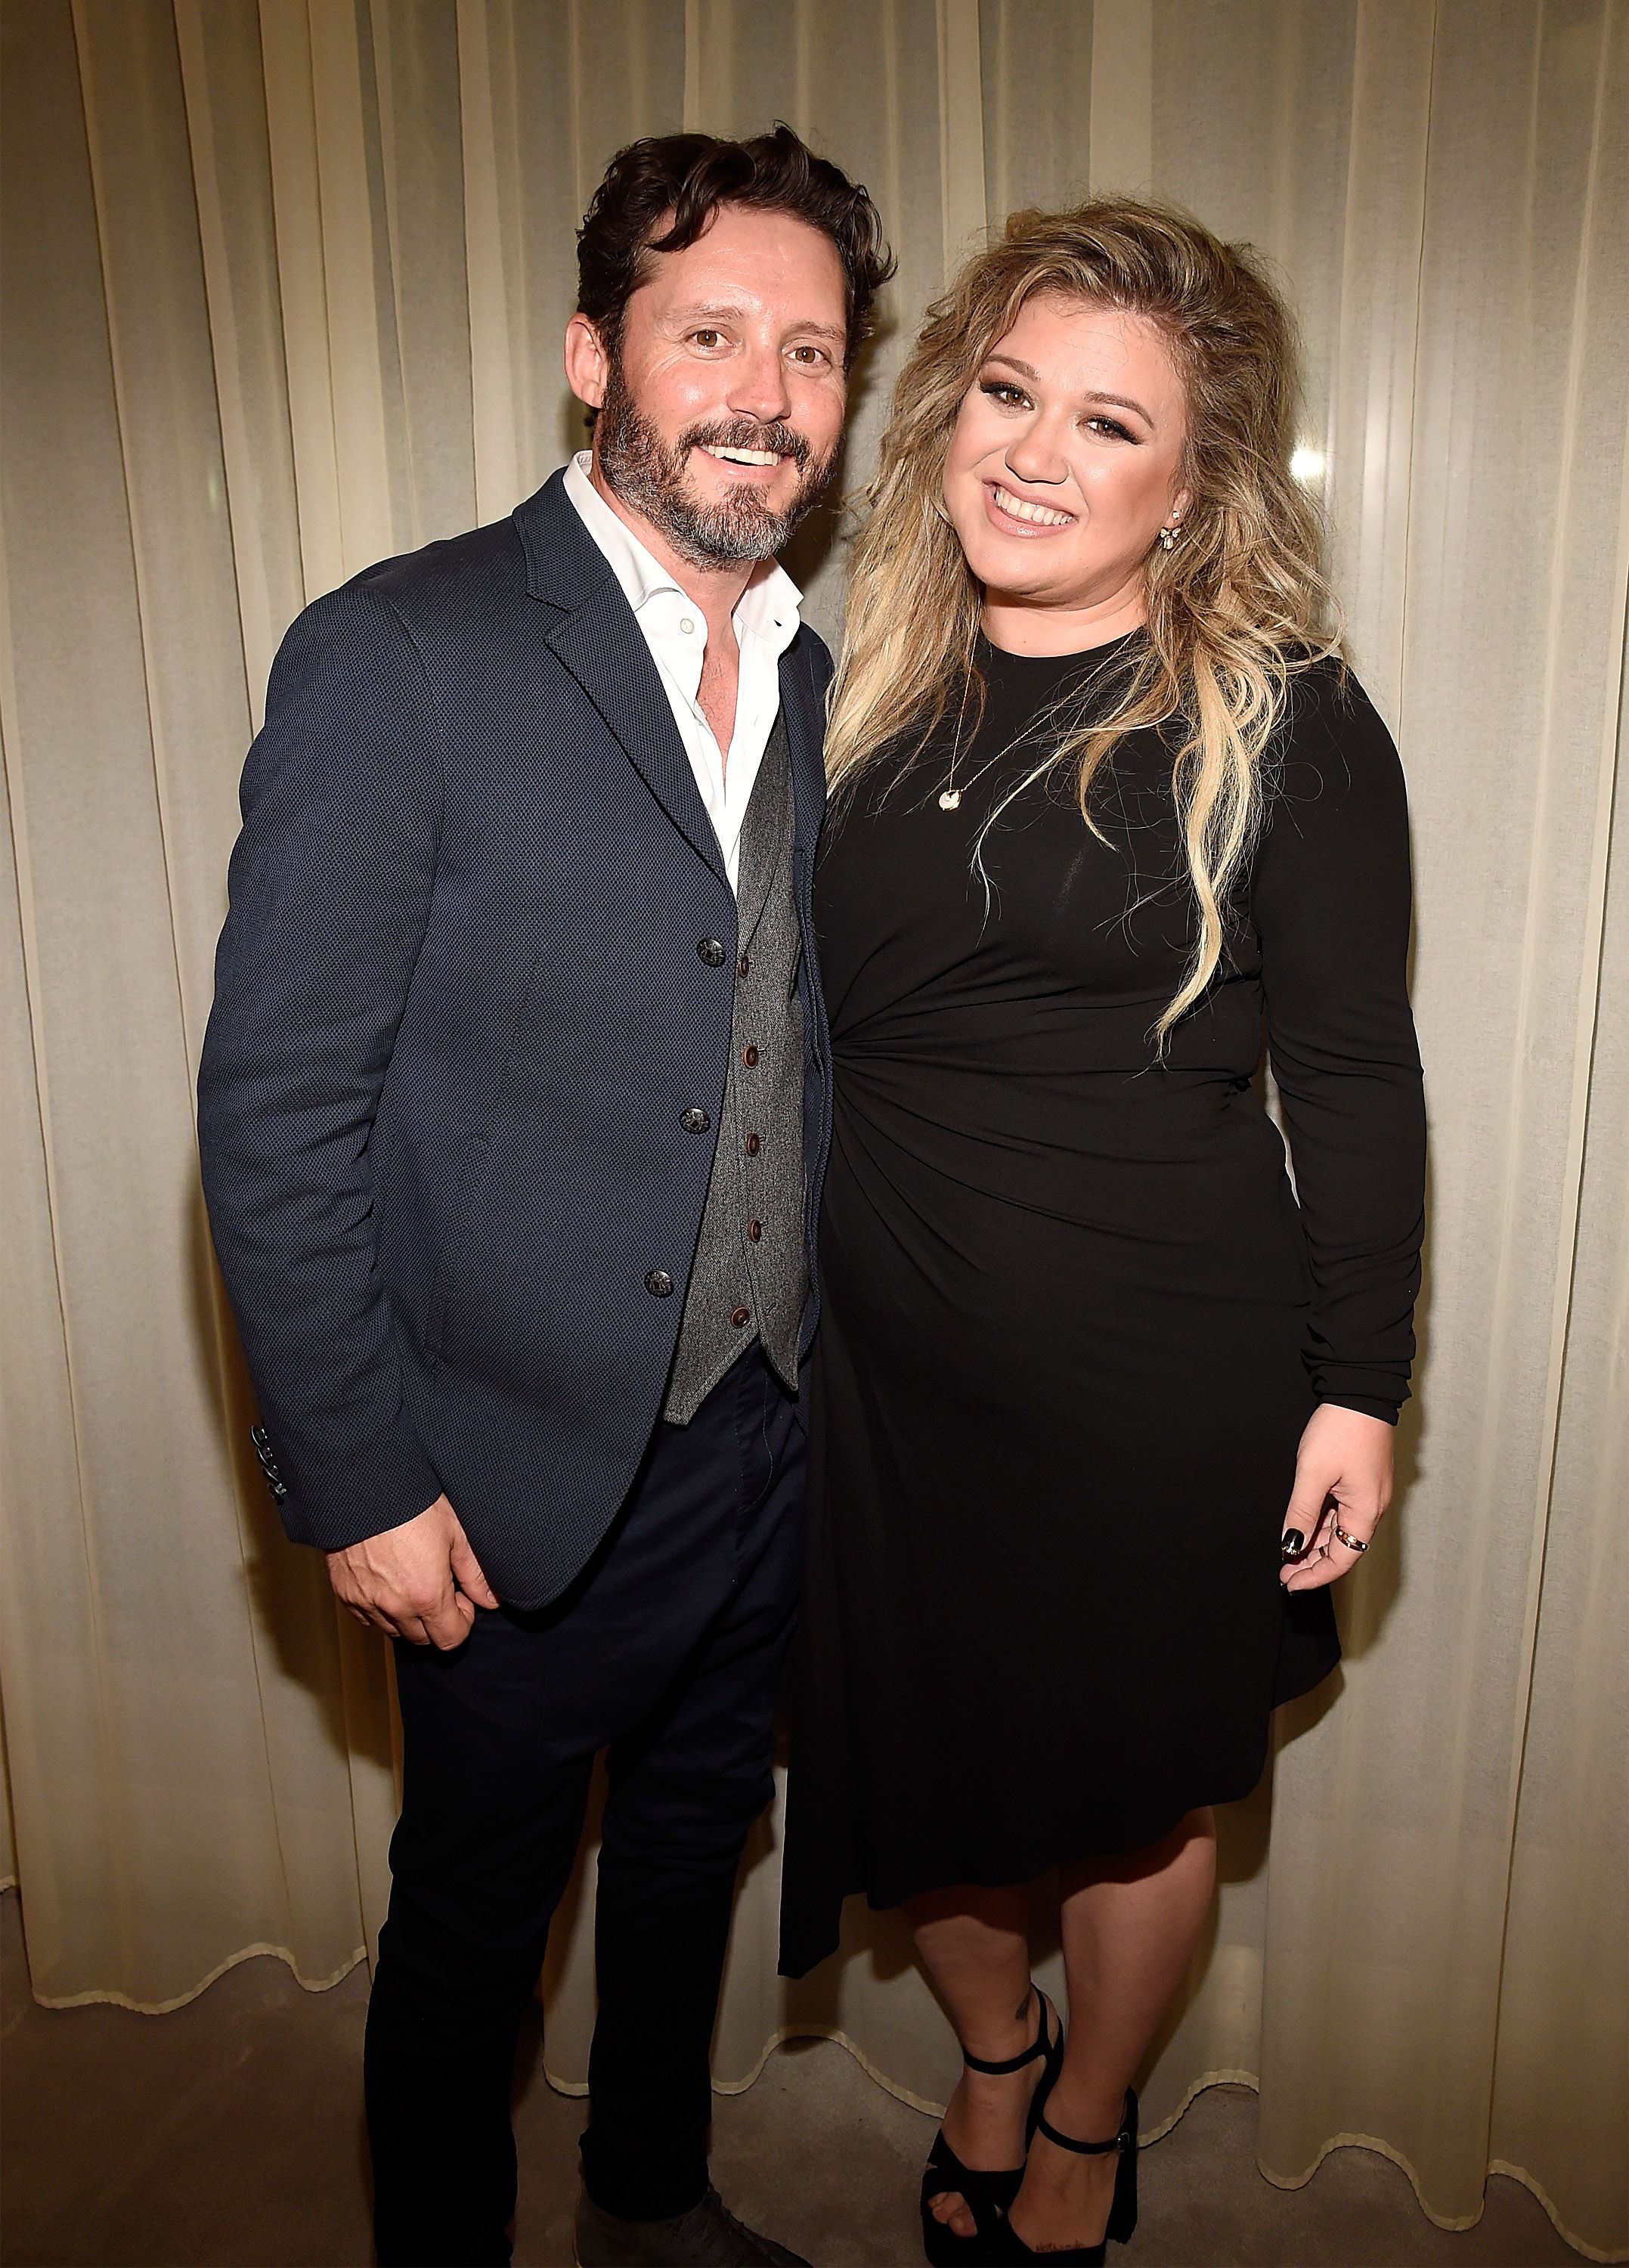 Brandon Blackstock and Kelly Clarkson backstage after she performed songs from her new album "The Meaning of Life" at The Rainbow Room on September 6, 2017. | Photo: Getty Images